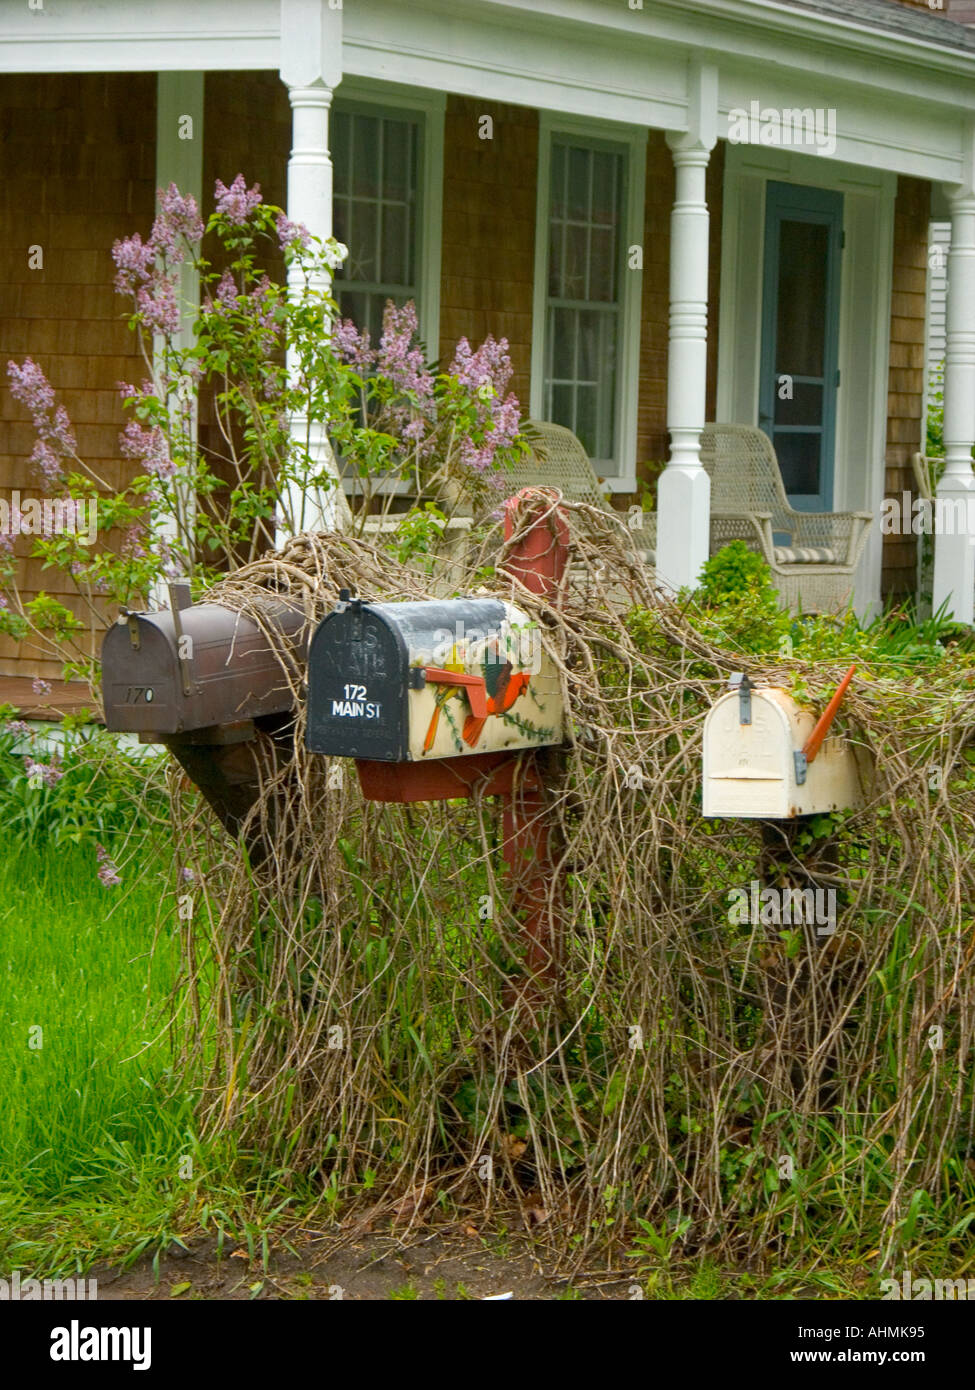 mailboxes outside house in sandwich cape cod massachussetts usa Stock Photo